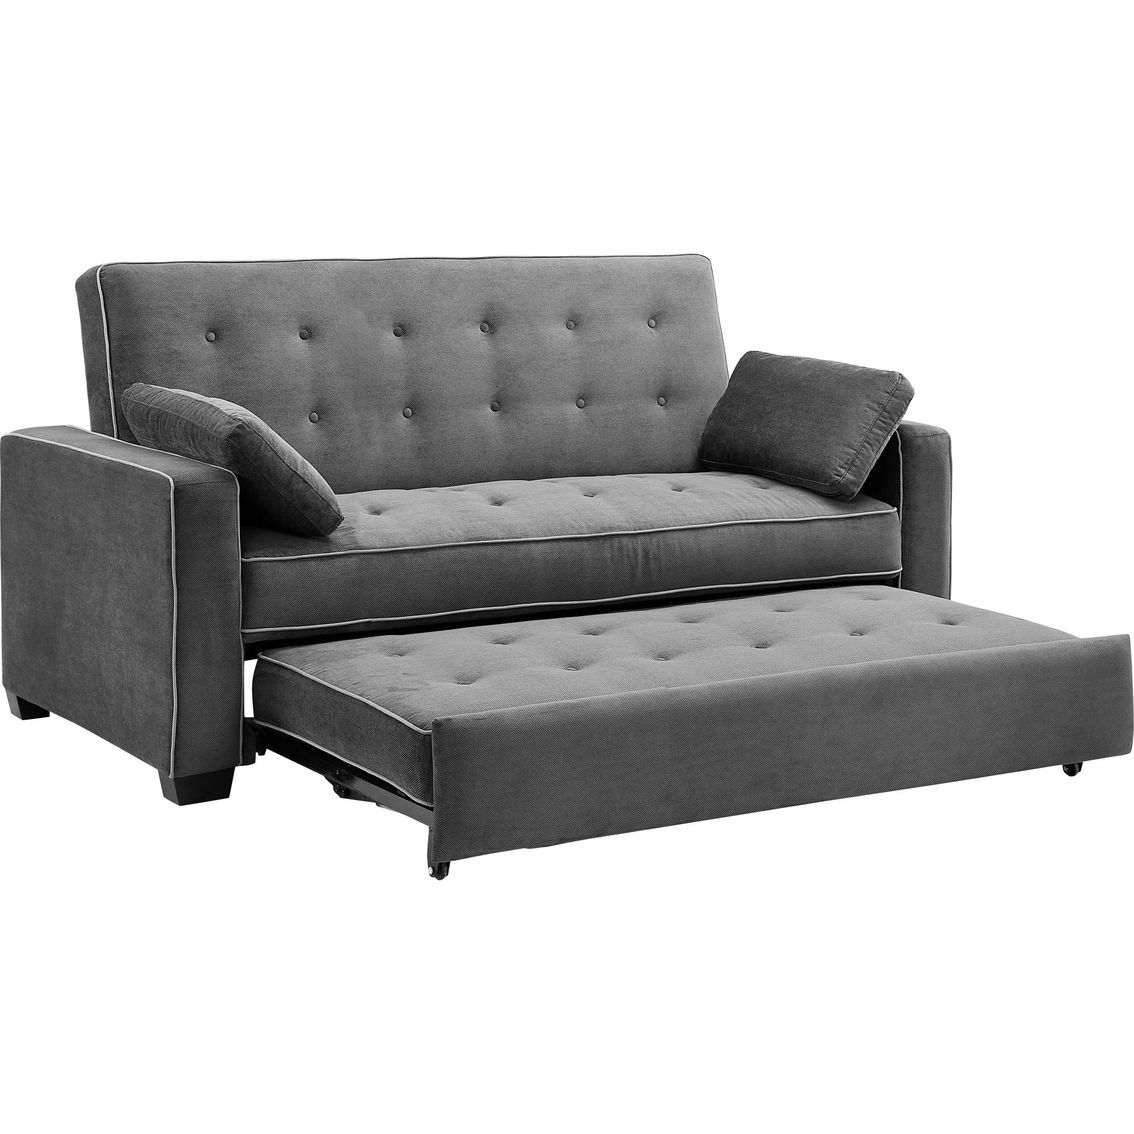 Serta Augustine Convertible Sofa Bed With Convertible Sofas (View 6 of 10)